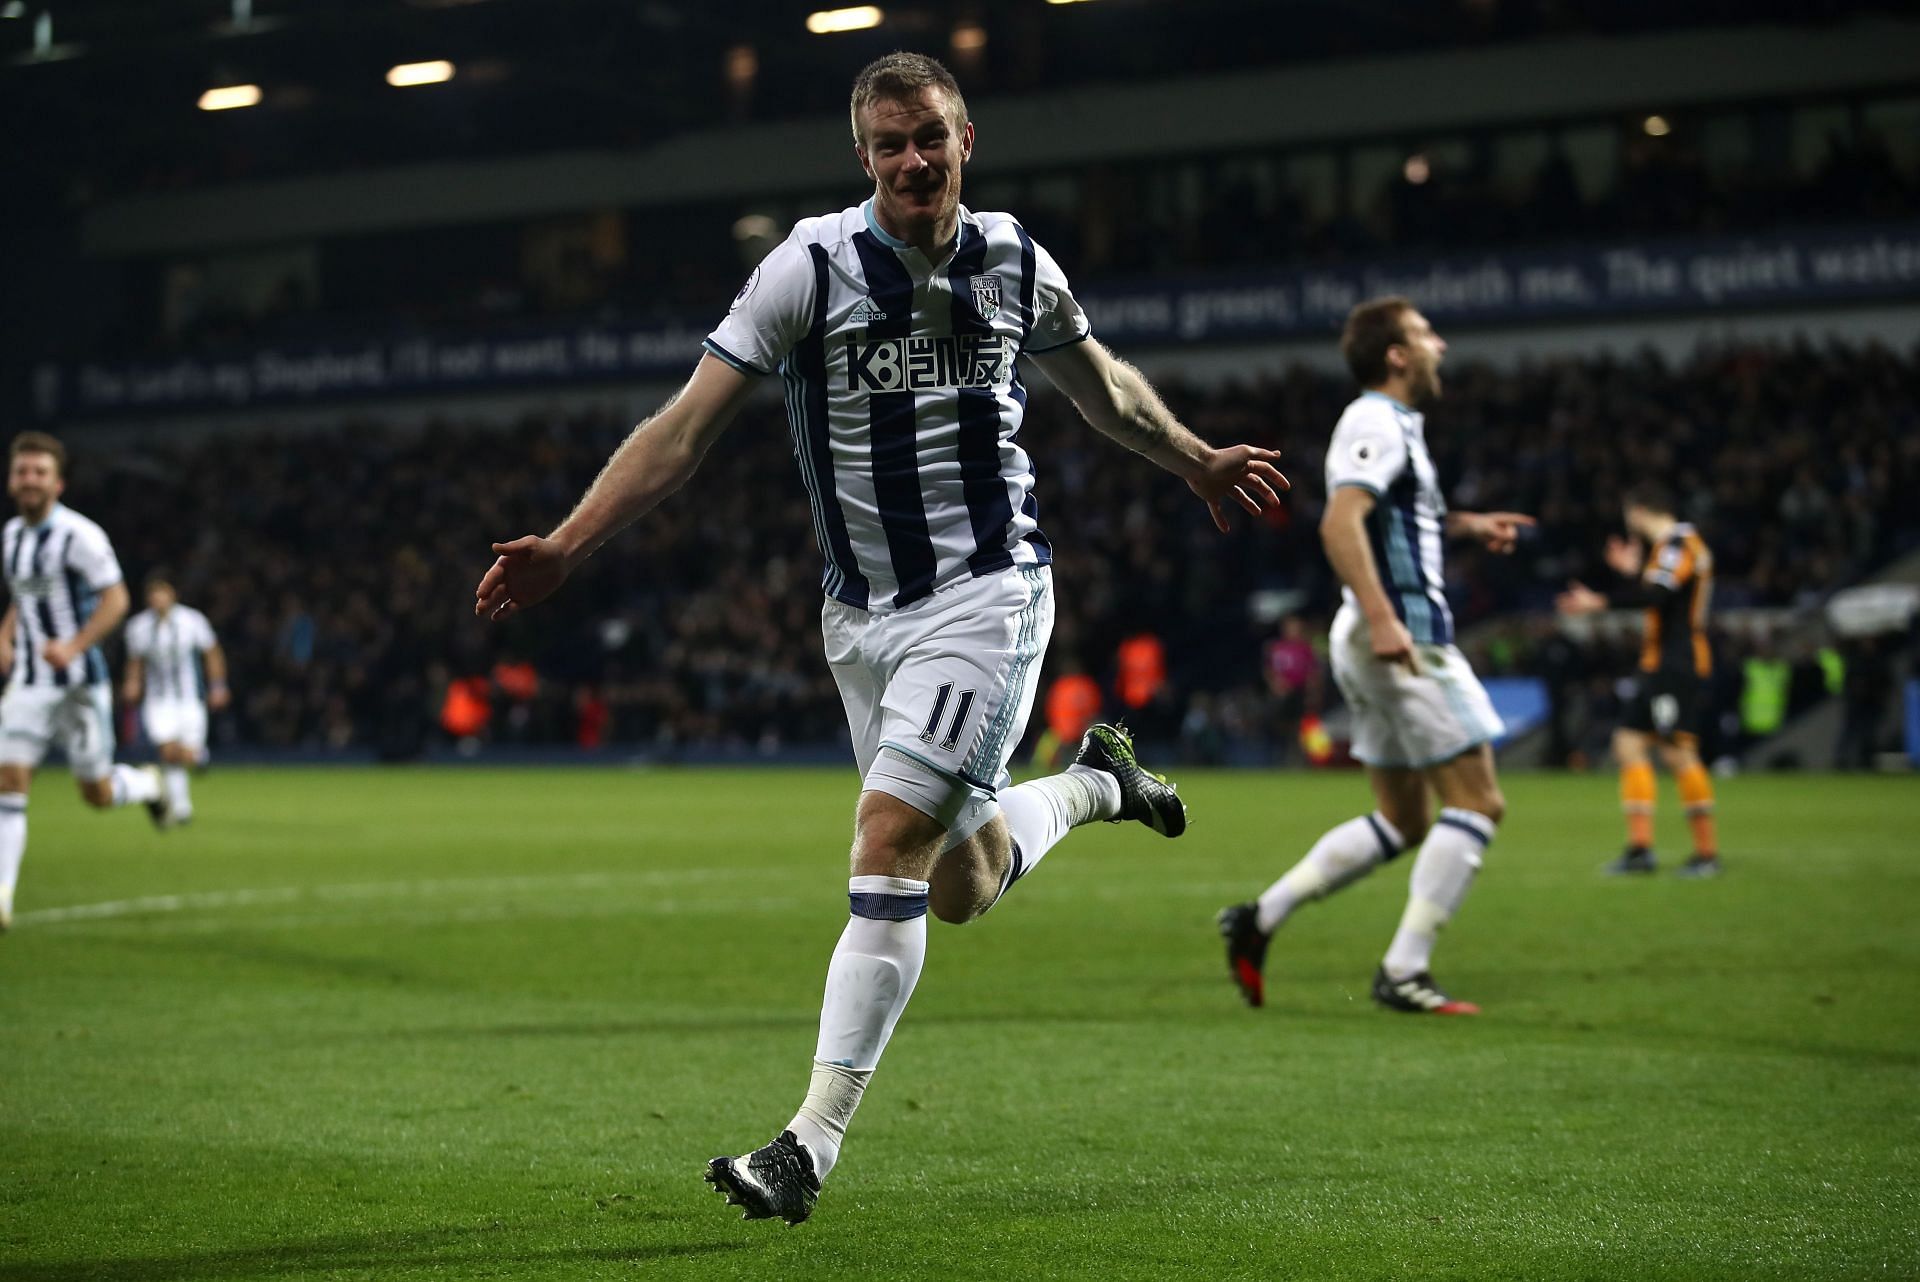 Chris Brunt tops the list with 28